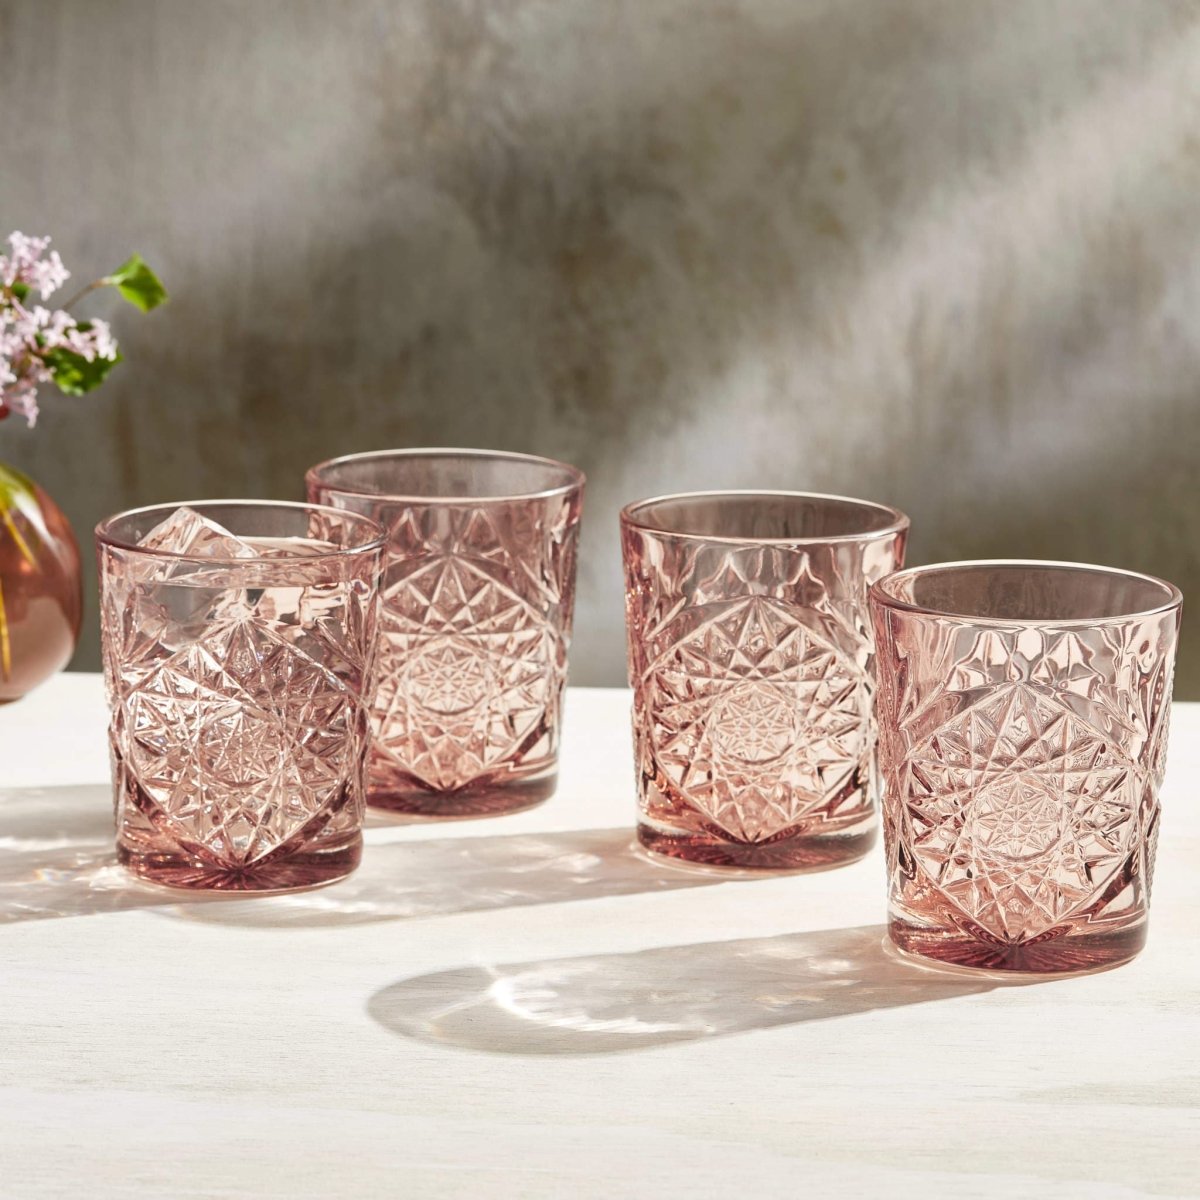 https://cdn.shopify.com/s/files/1/0275/1876/3088/products/hobstar-double-old-fashioned-glasses-12oz-rose-set-of-4-944004_1445x.jpg?v=1701567468